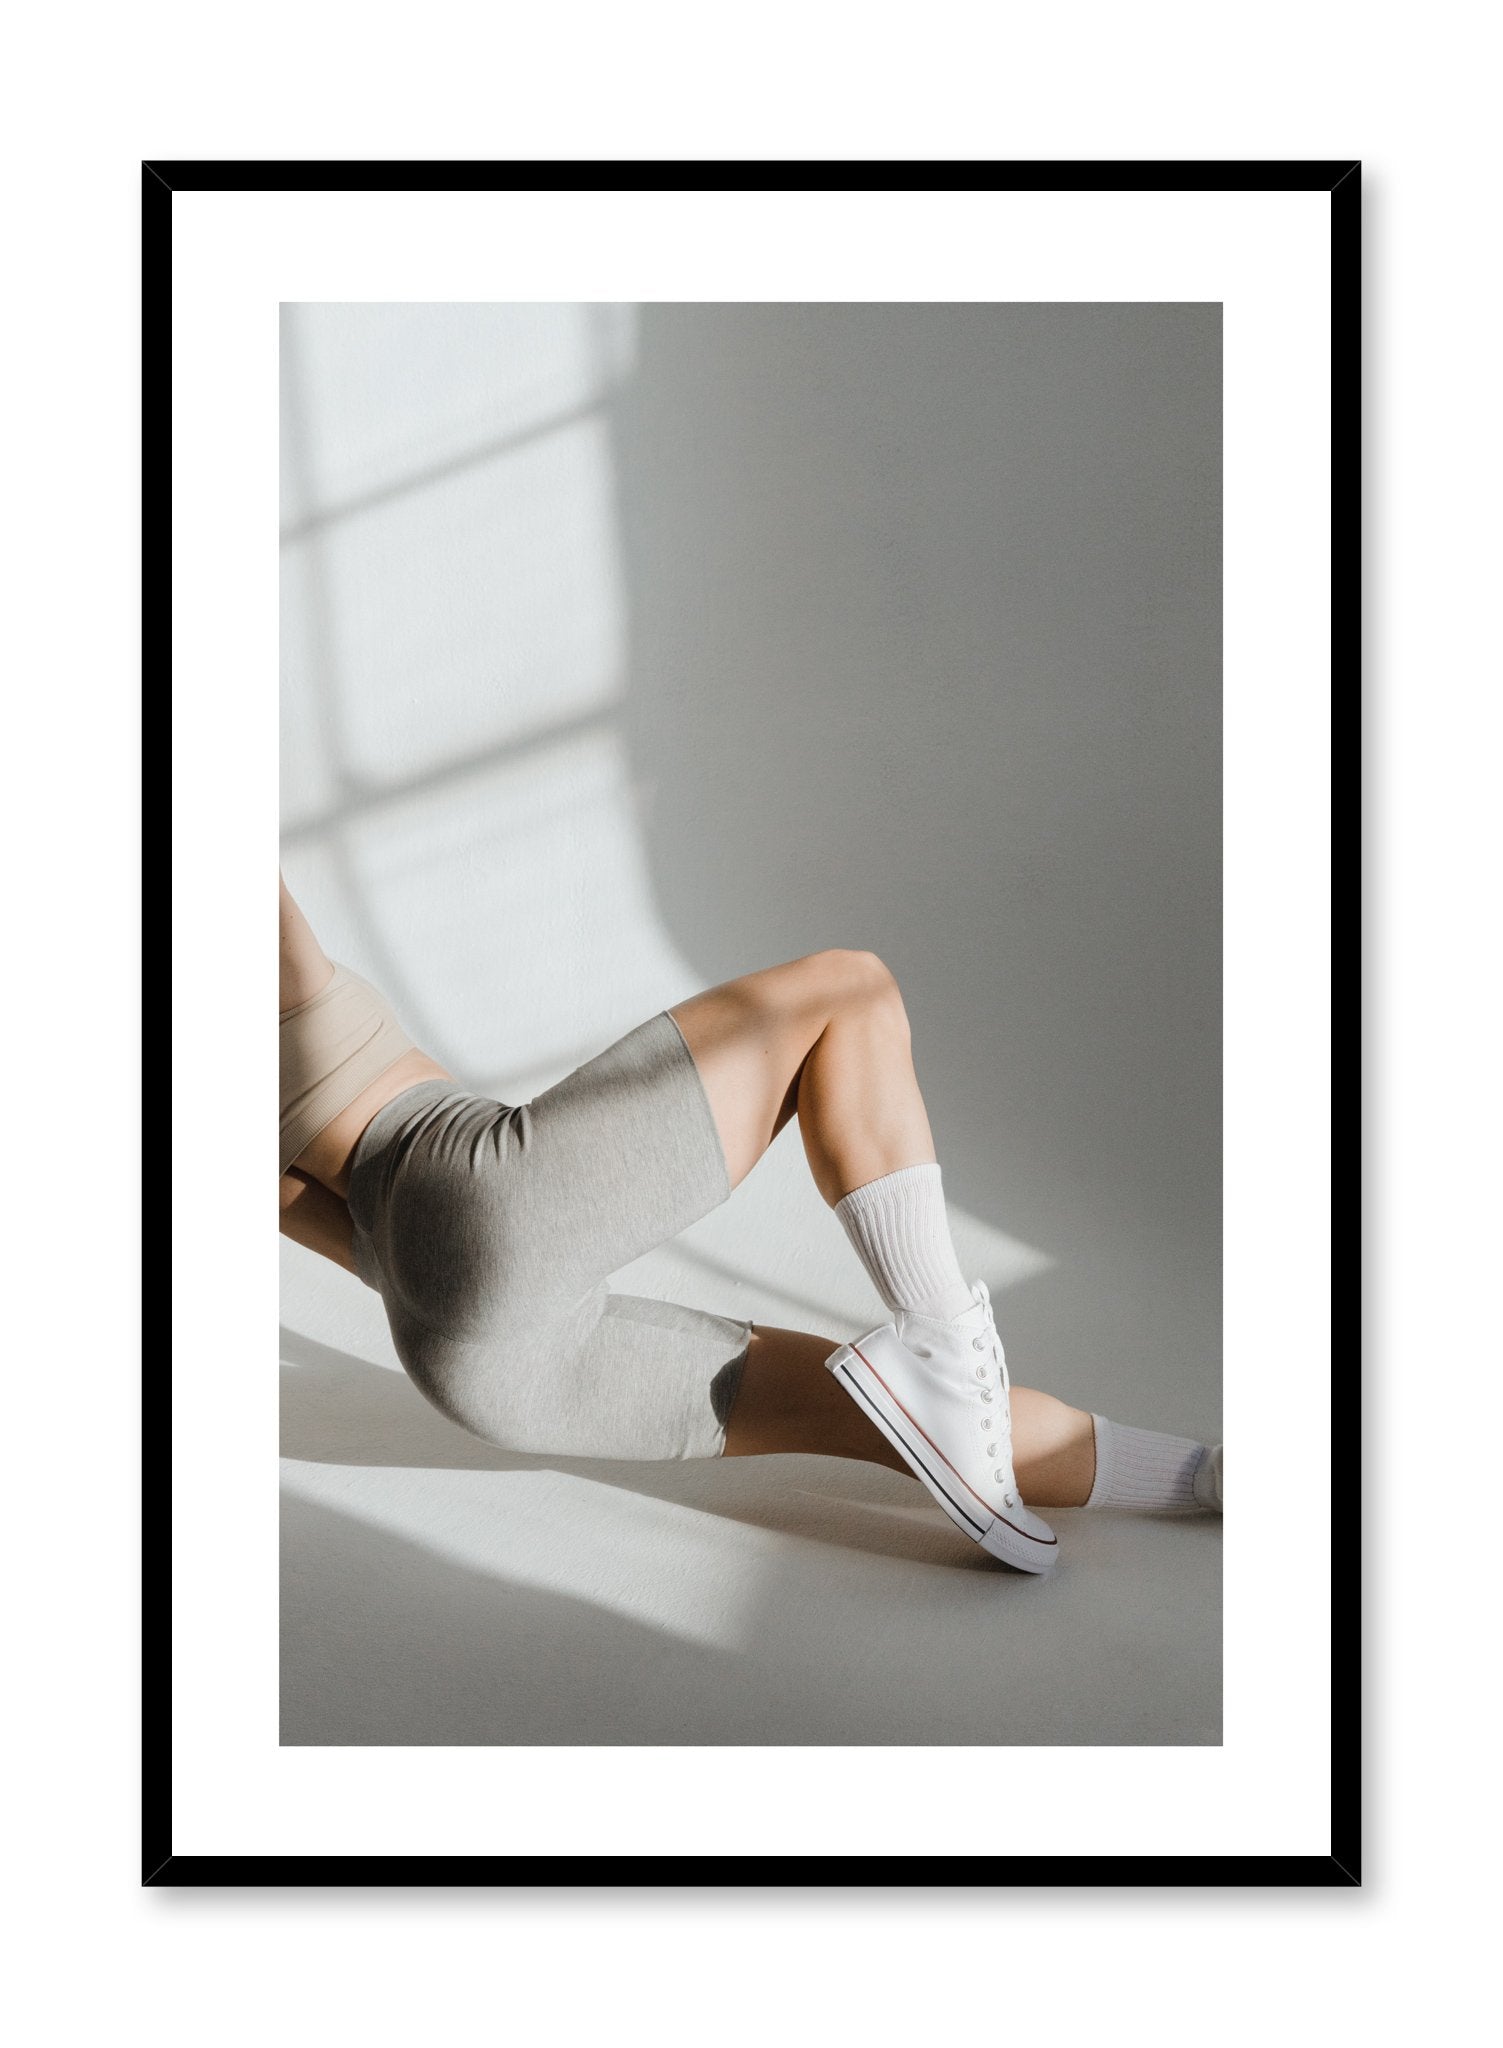 Fashion photography poster by Opposite Wall with woman in sports clothing